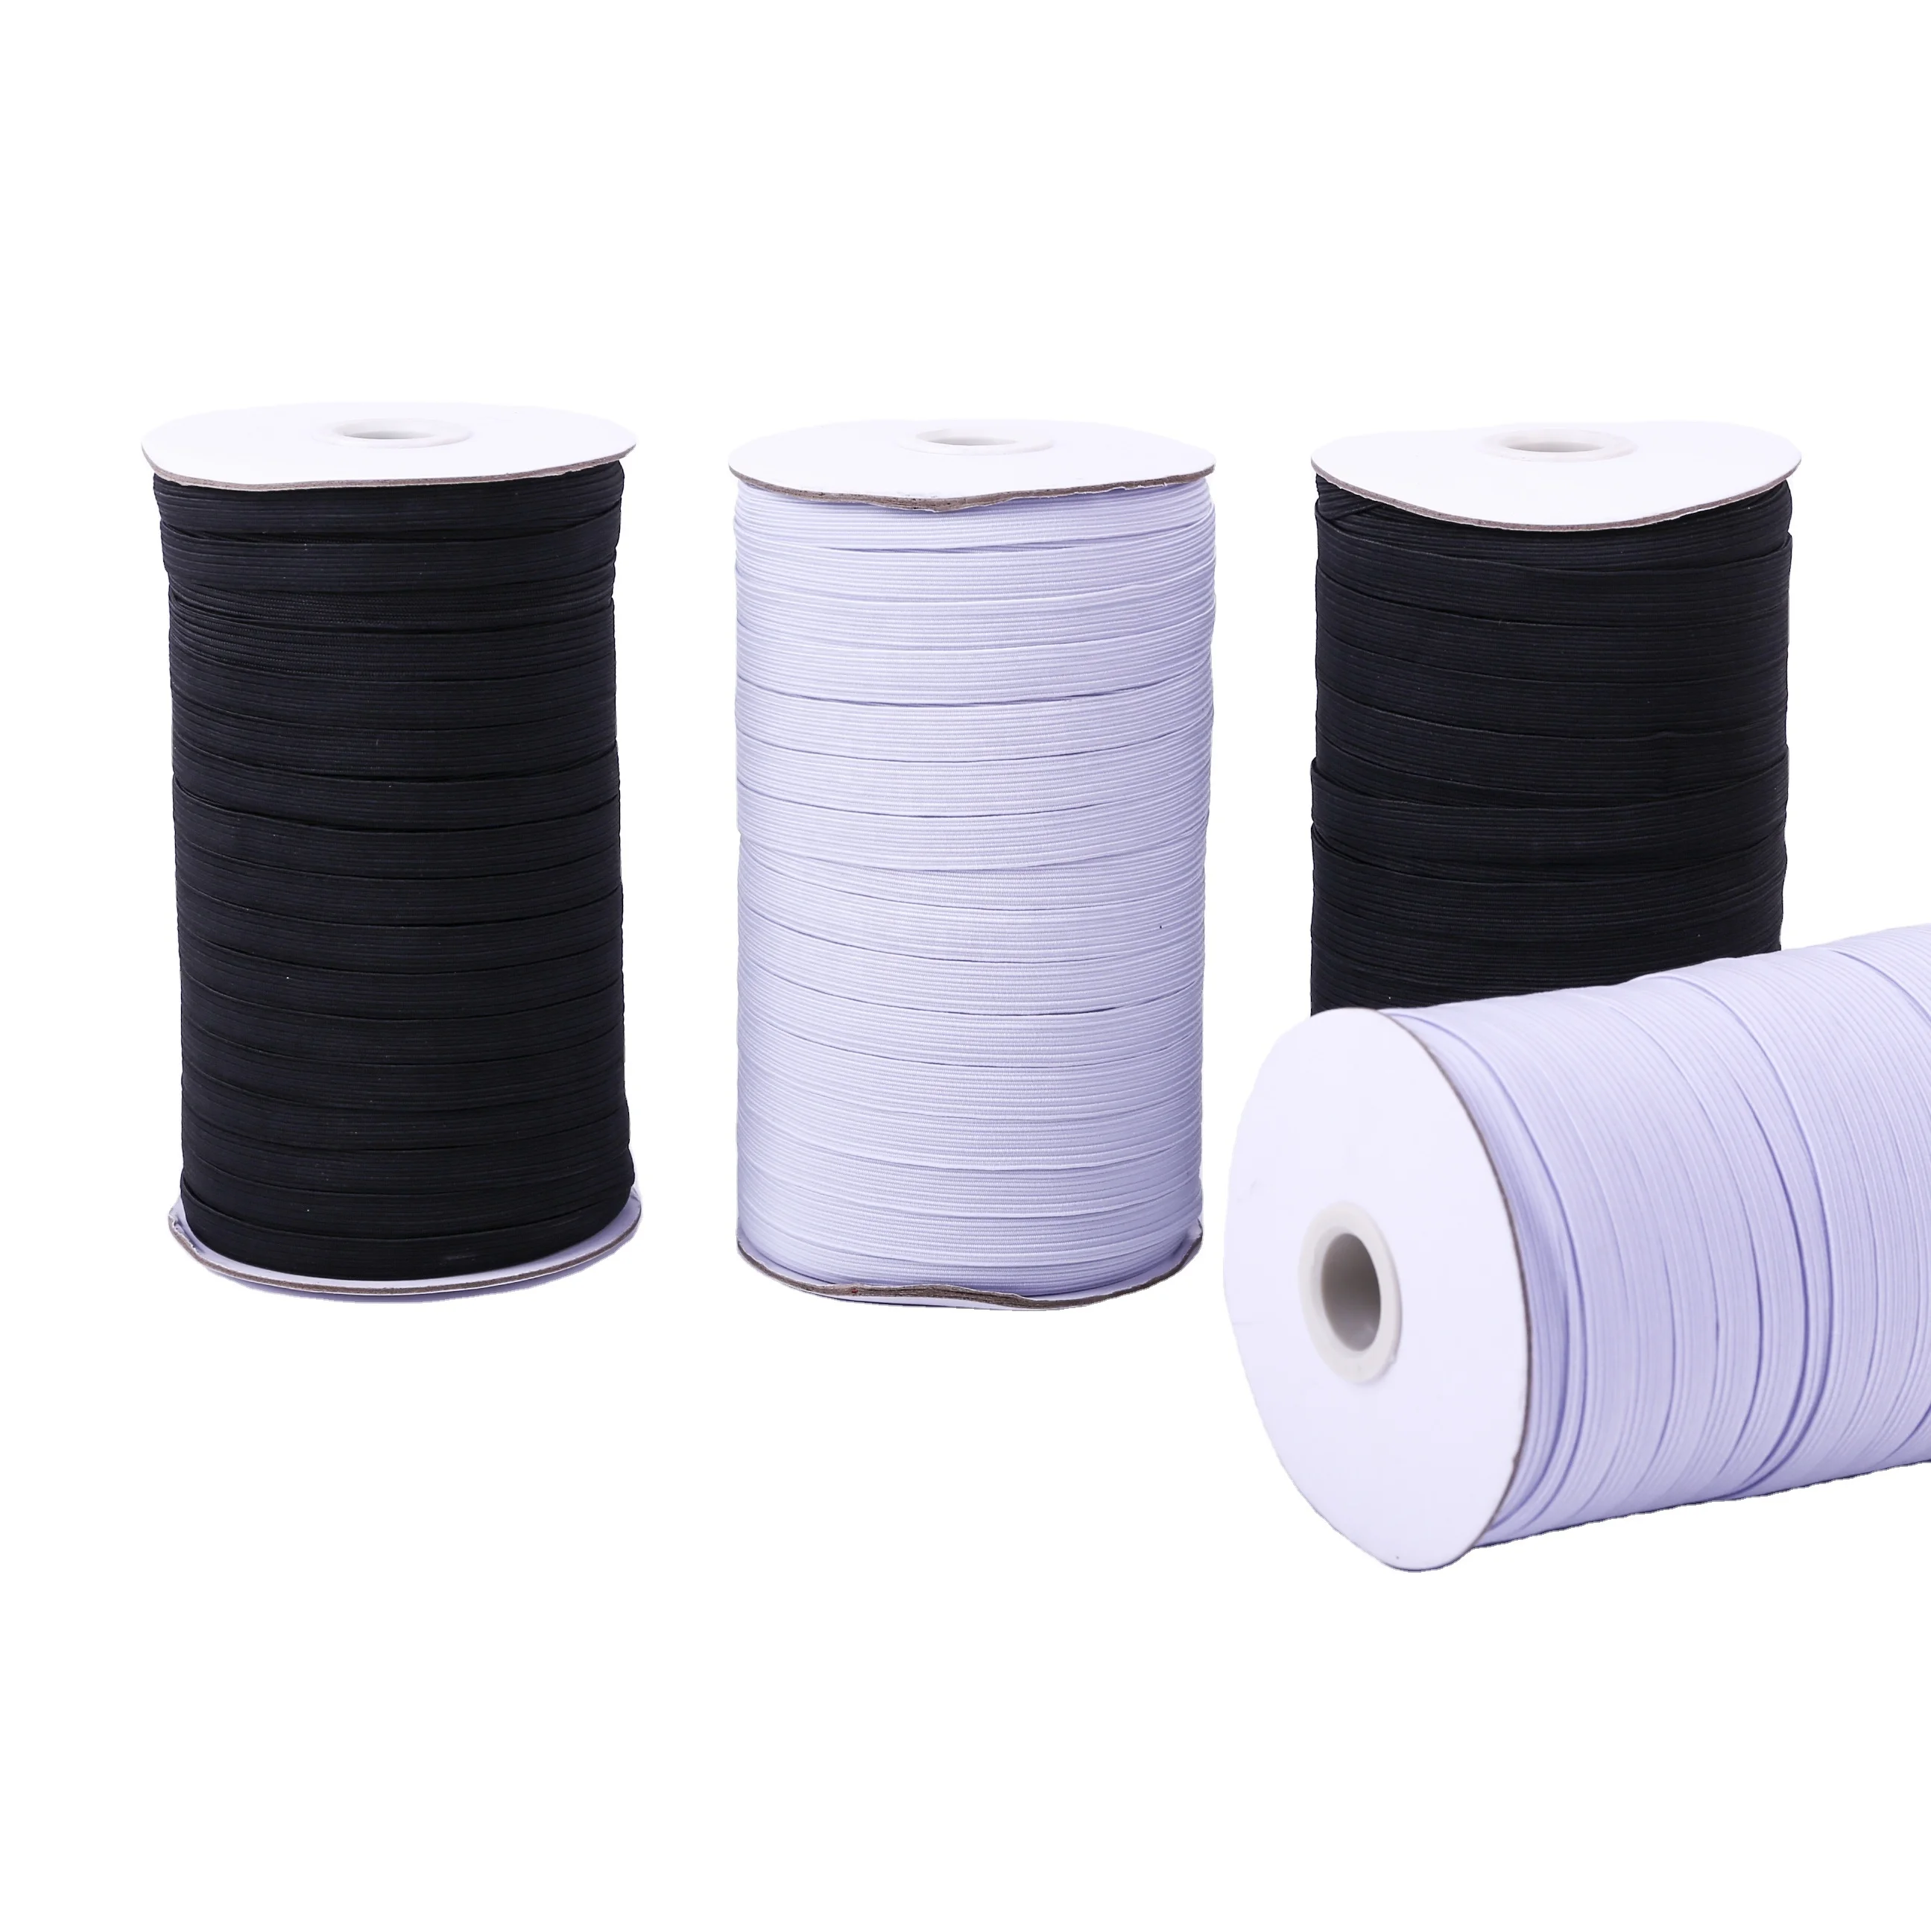 

Wholesale Custom Rolls Black White 3mm 5mm 6mm 8mm 10mm 12mm Knitted Textile Flat Braided Elastic Band For Garment Sewing, White,black,accept customized